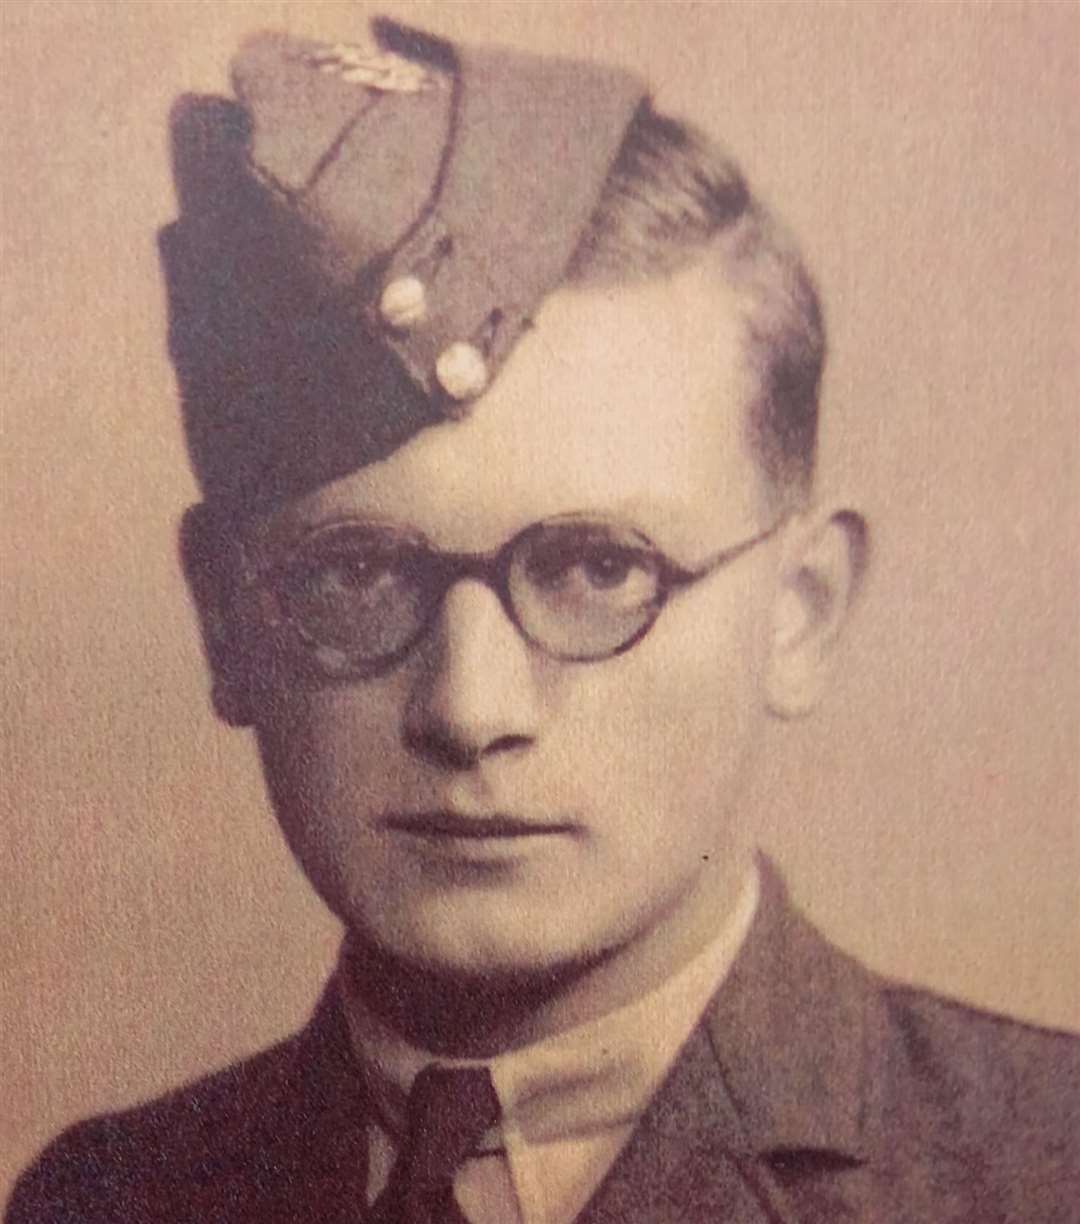 Hernhill's John Sim served in the RAF from 1942 until the end of the Second World War